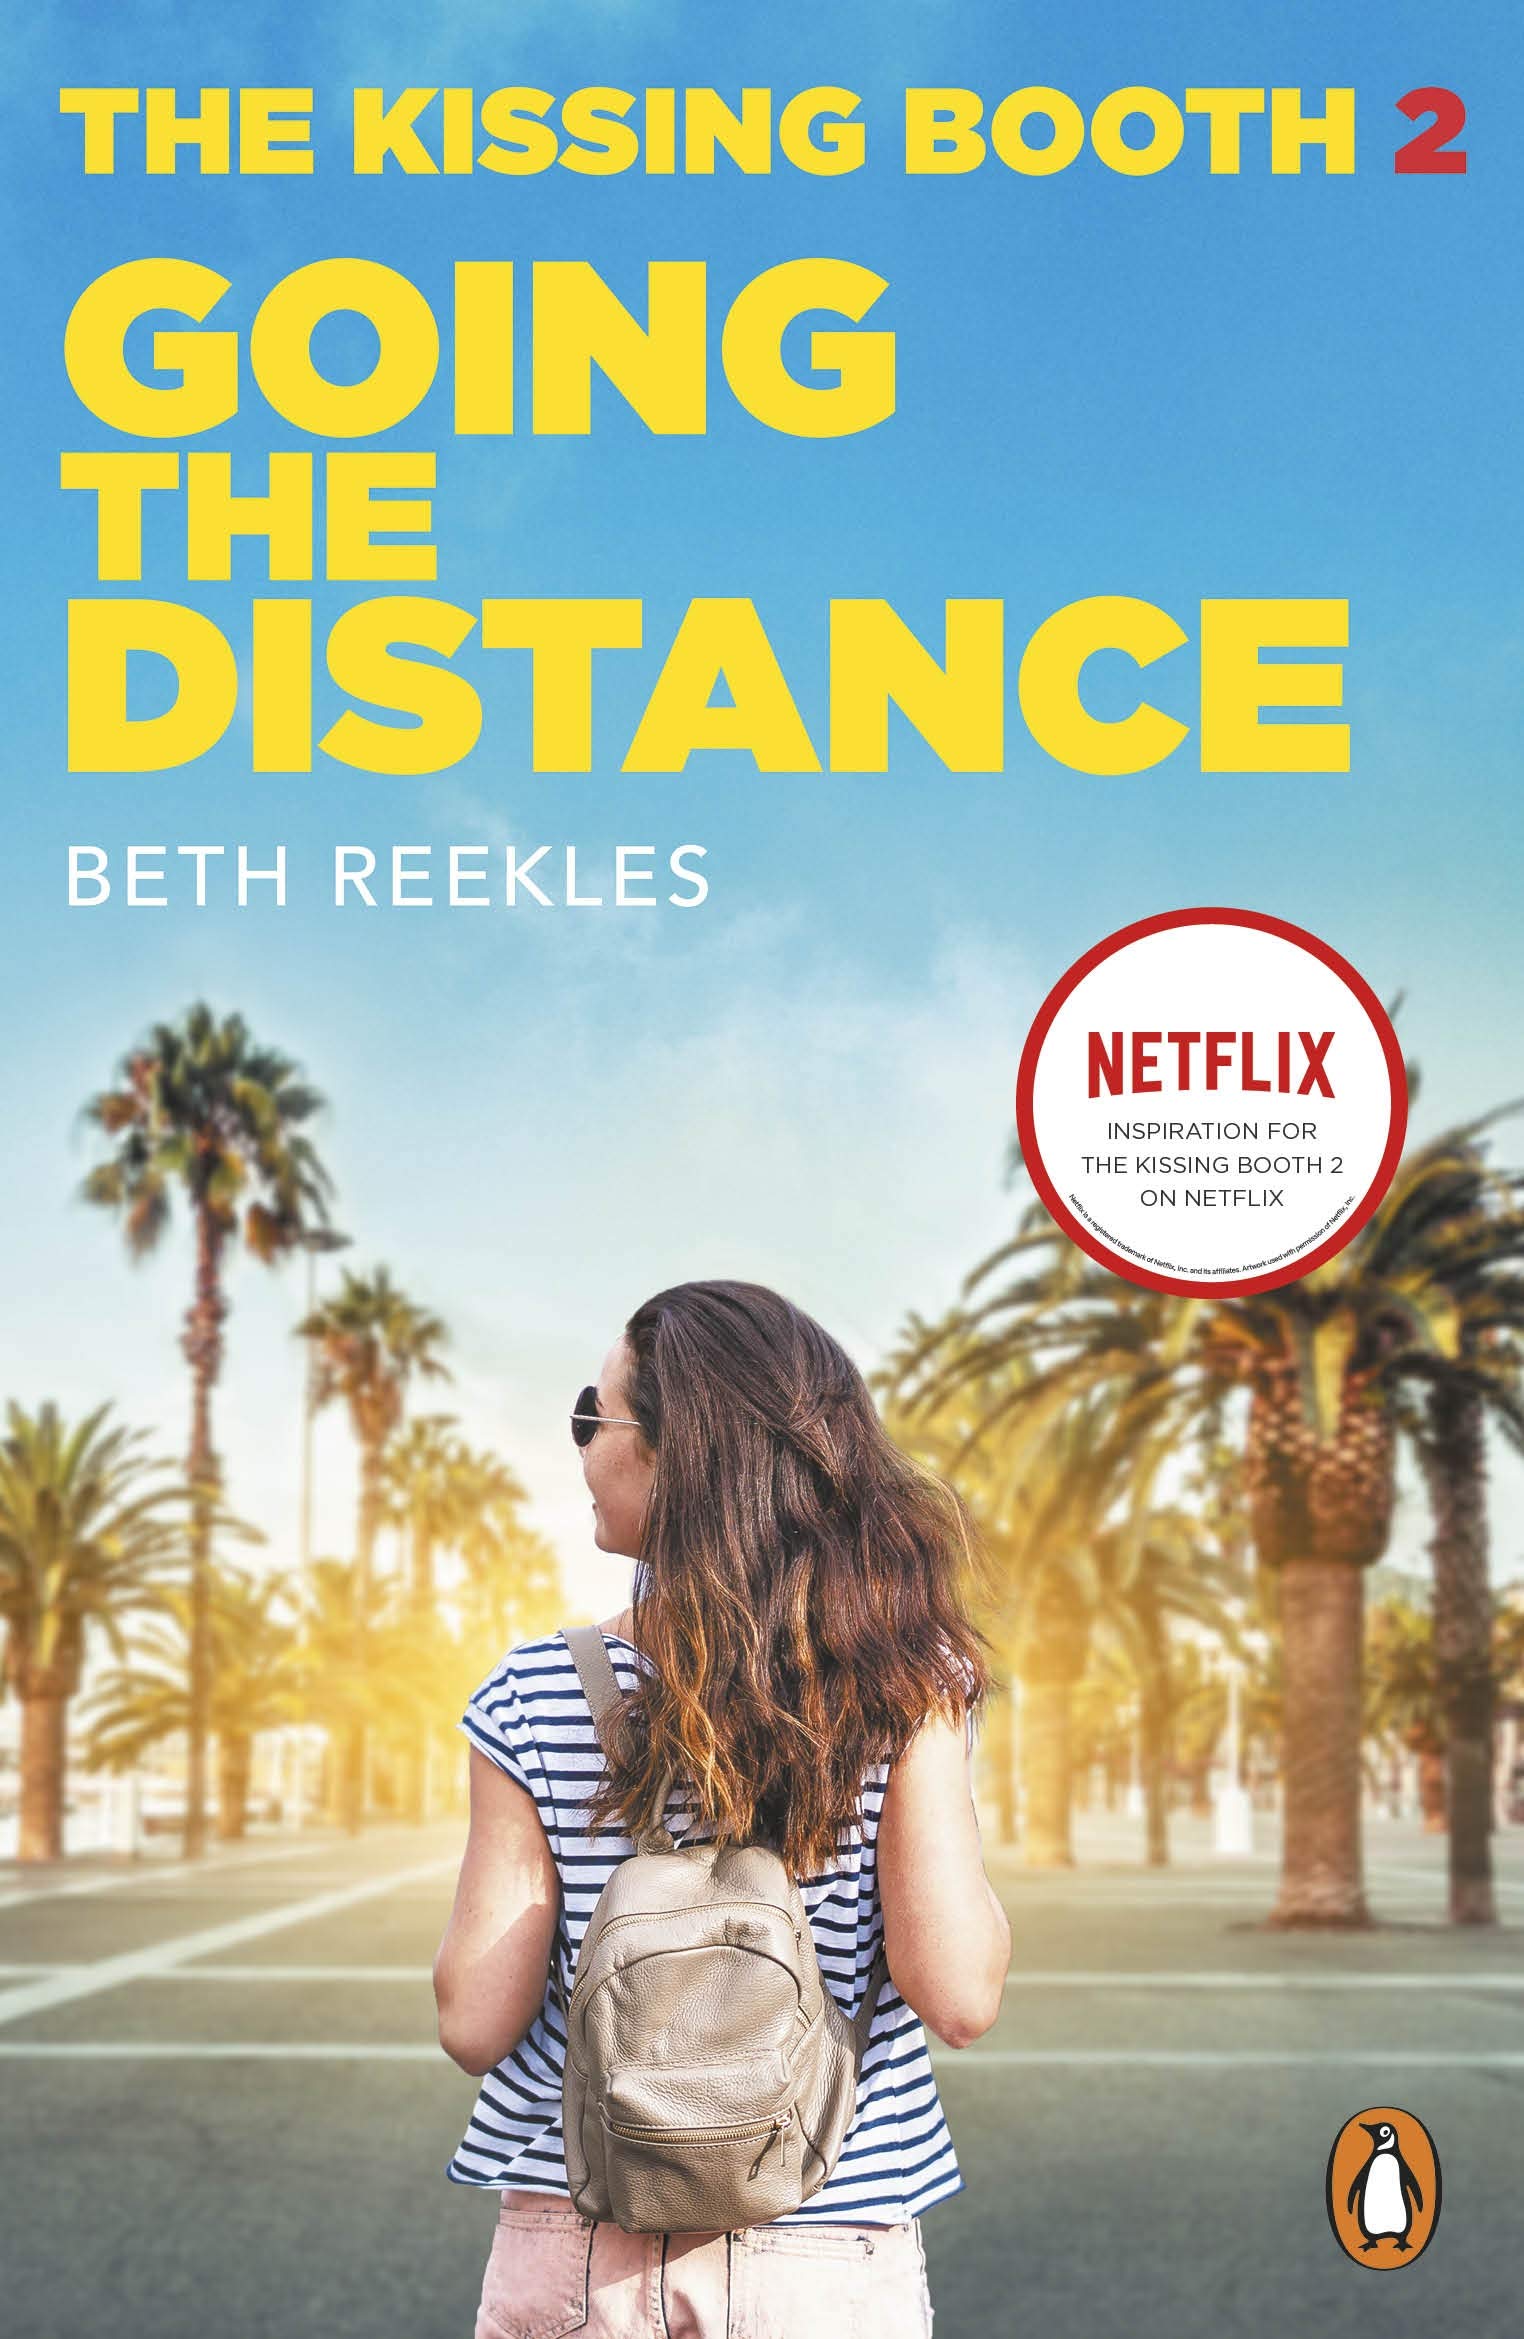 Kissing Booth 2: Going the Distance | Beth Reekles